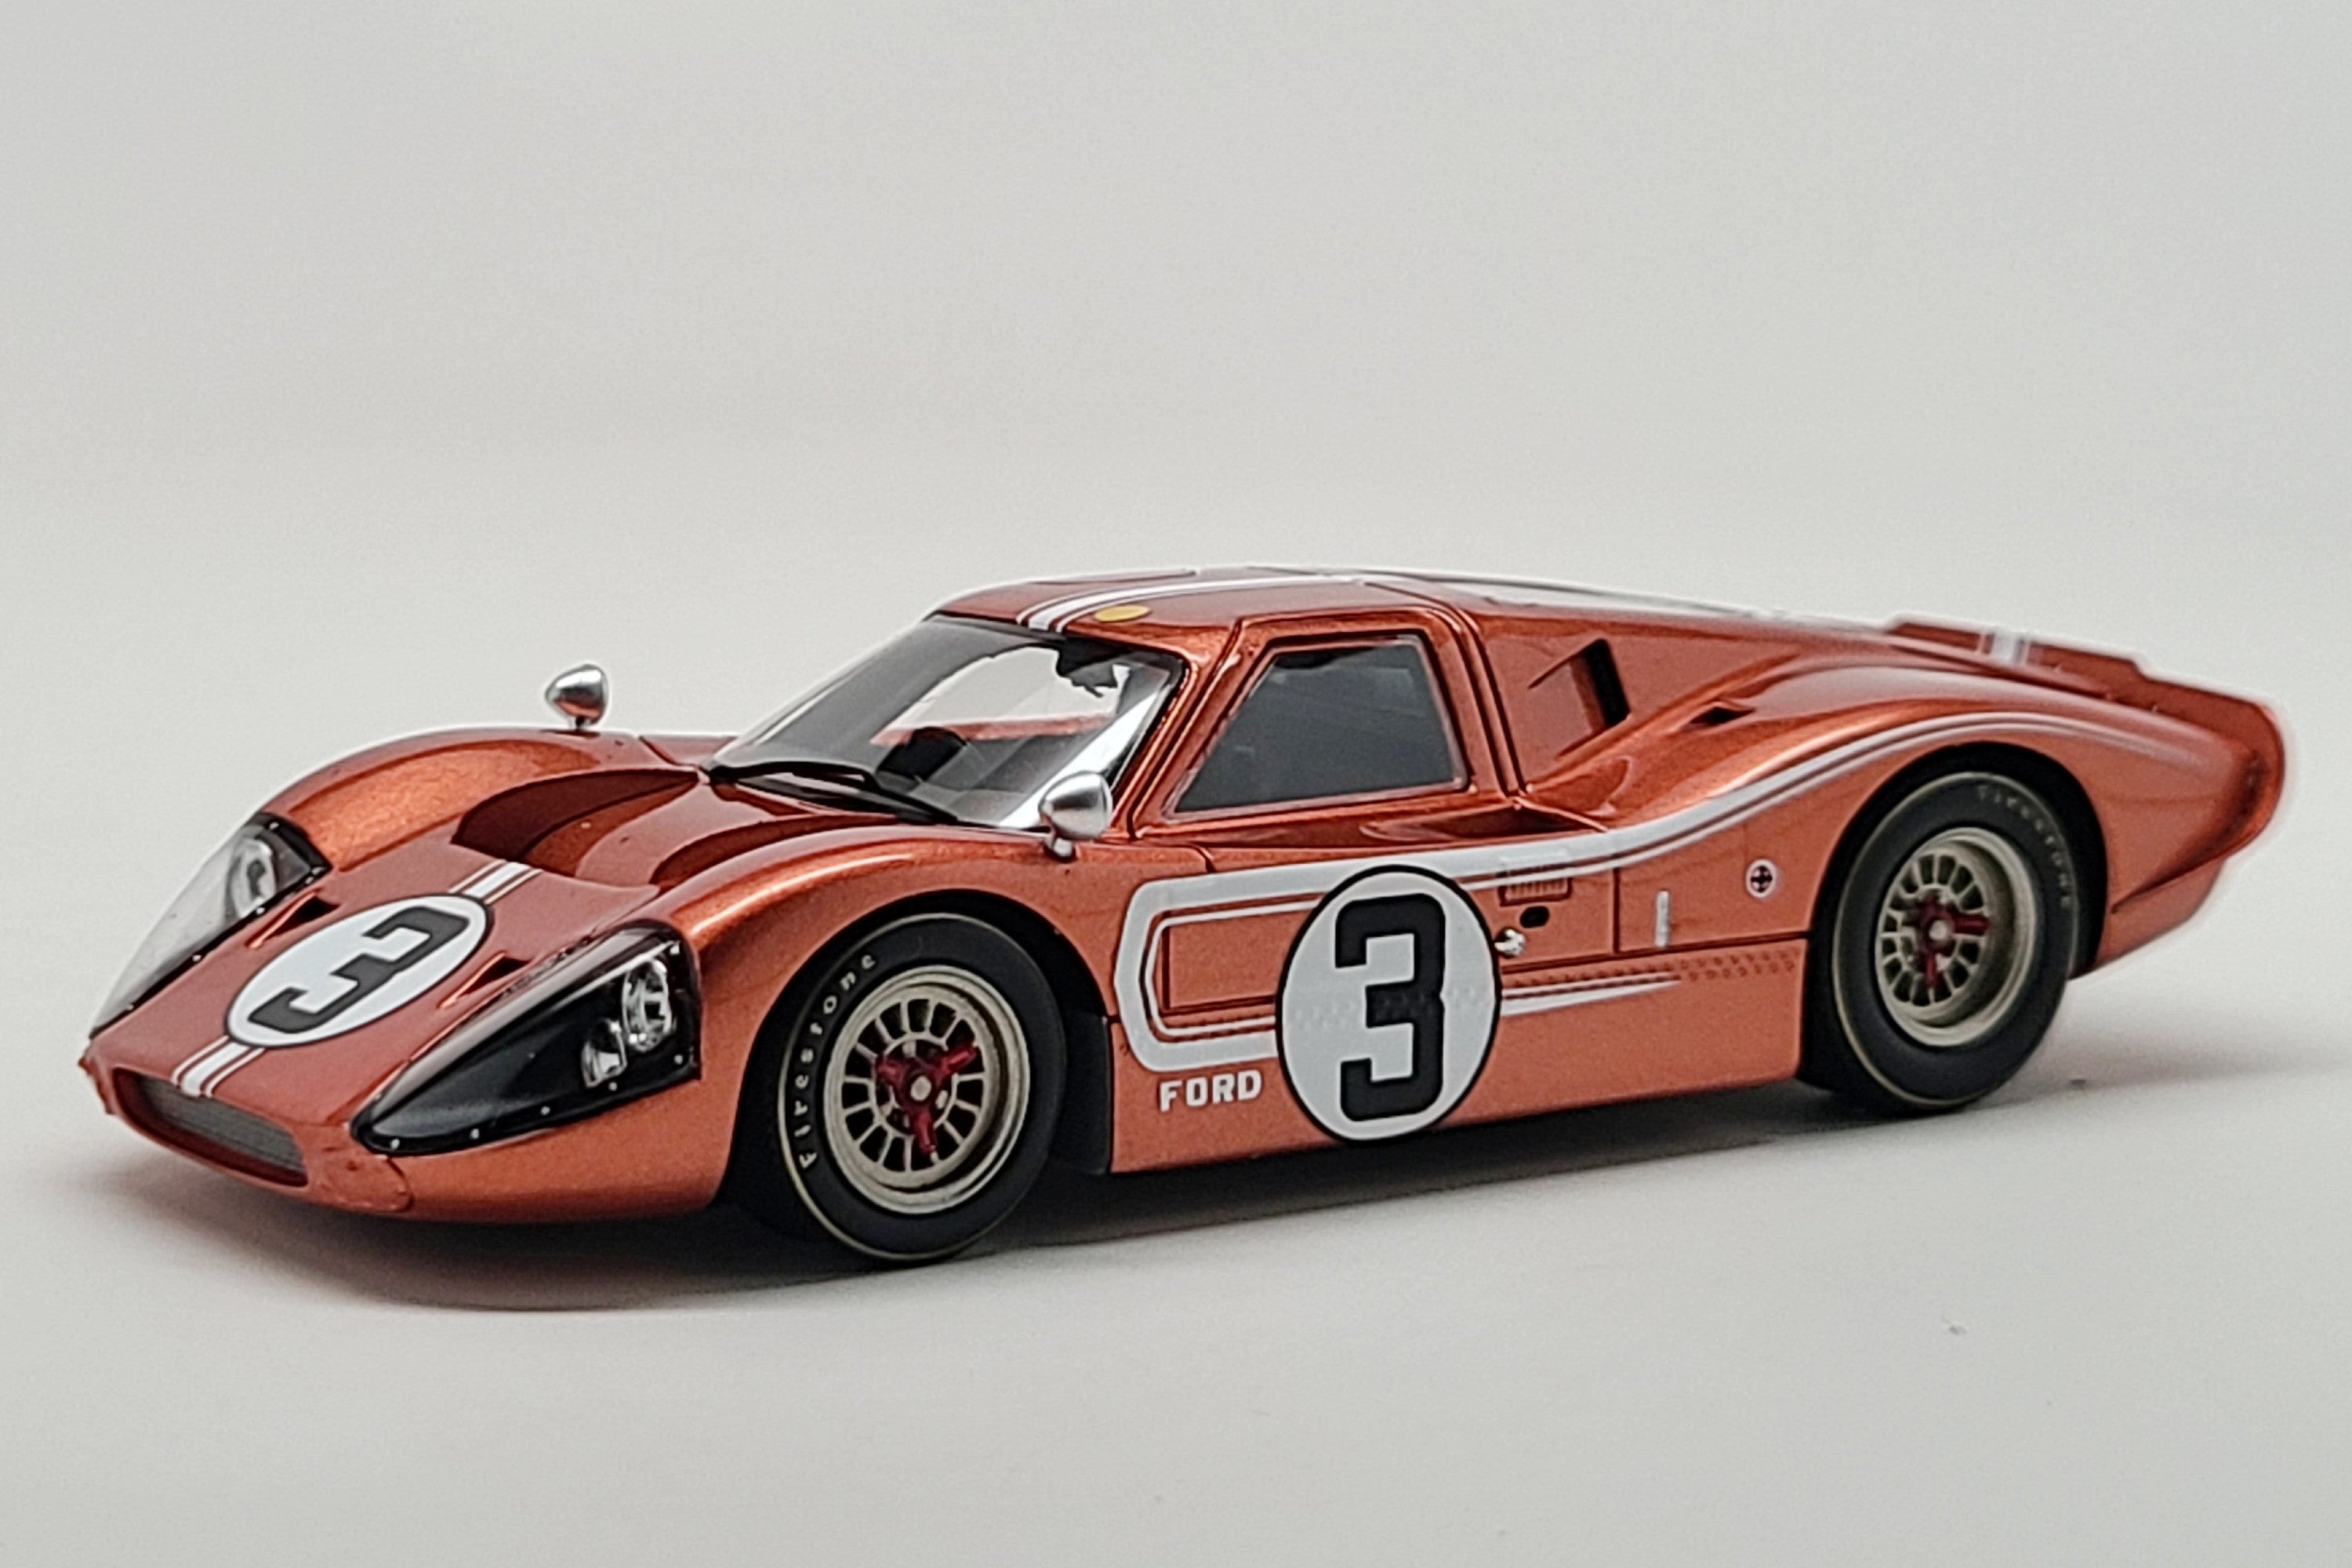 Ford Mk. IV (1967 Le Mans - Andretti/Bianchi) | 1:43 Scale Model Car by Spark | Front Quarter